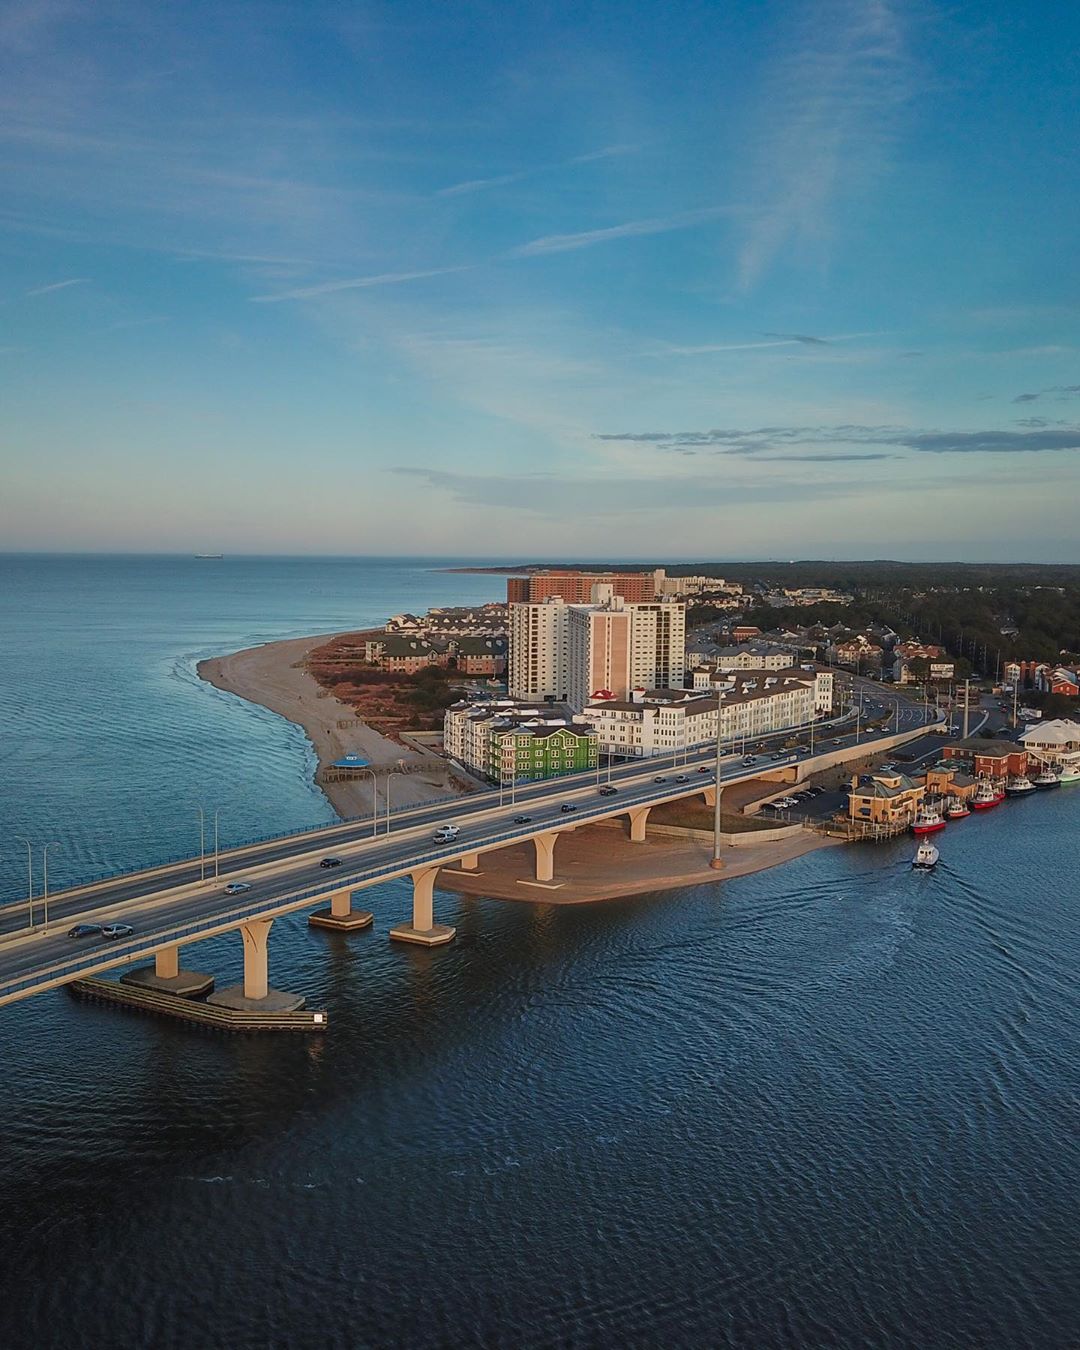 Virginia Beach view from a drone with water and city in view. Photo by Instagram user @jwillyagaze.